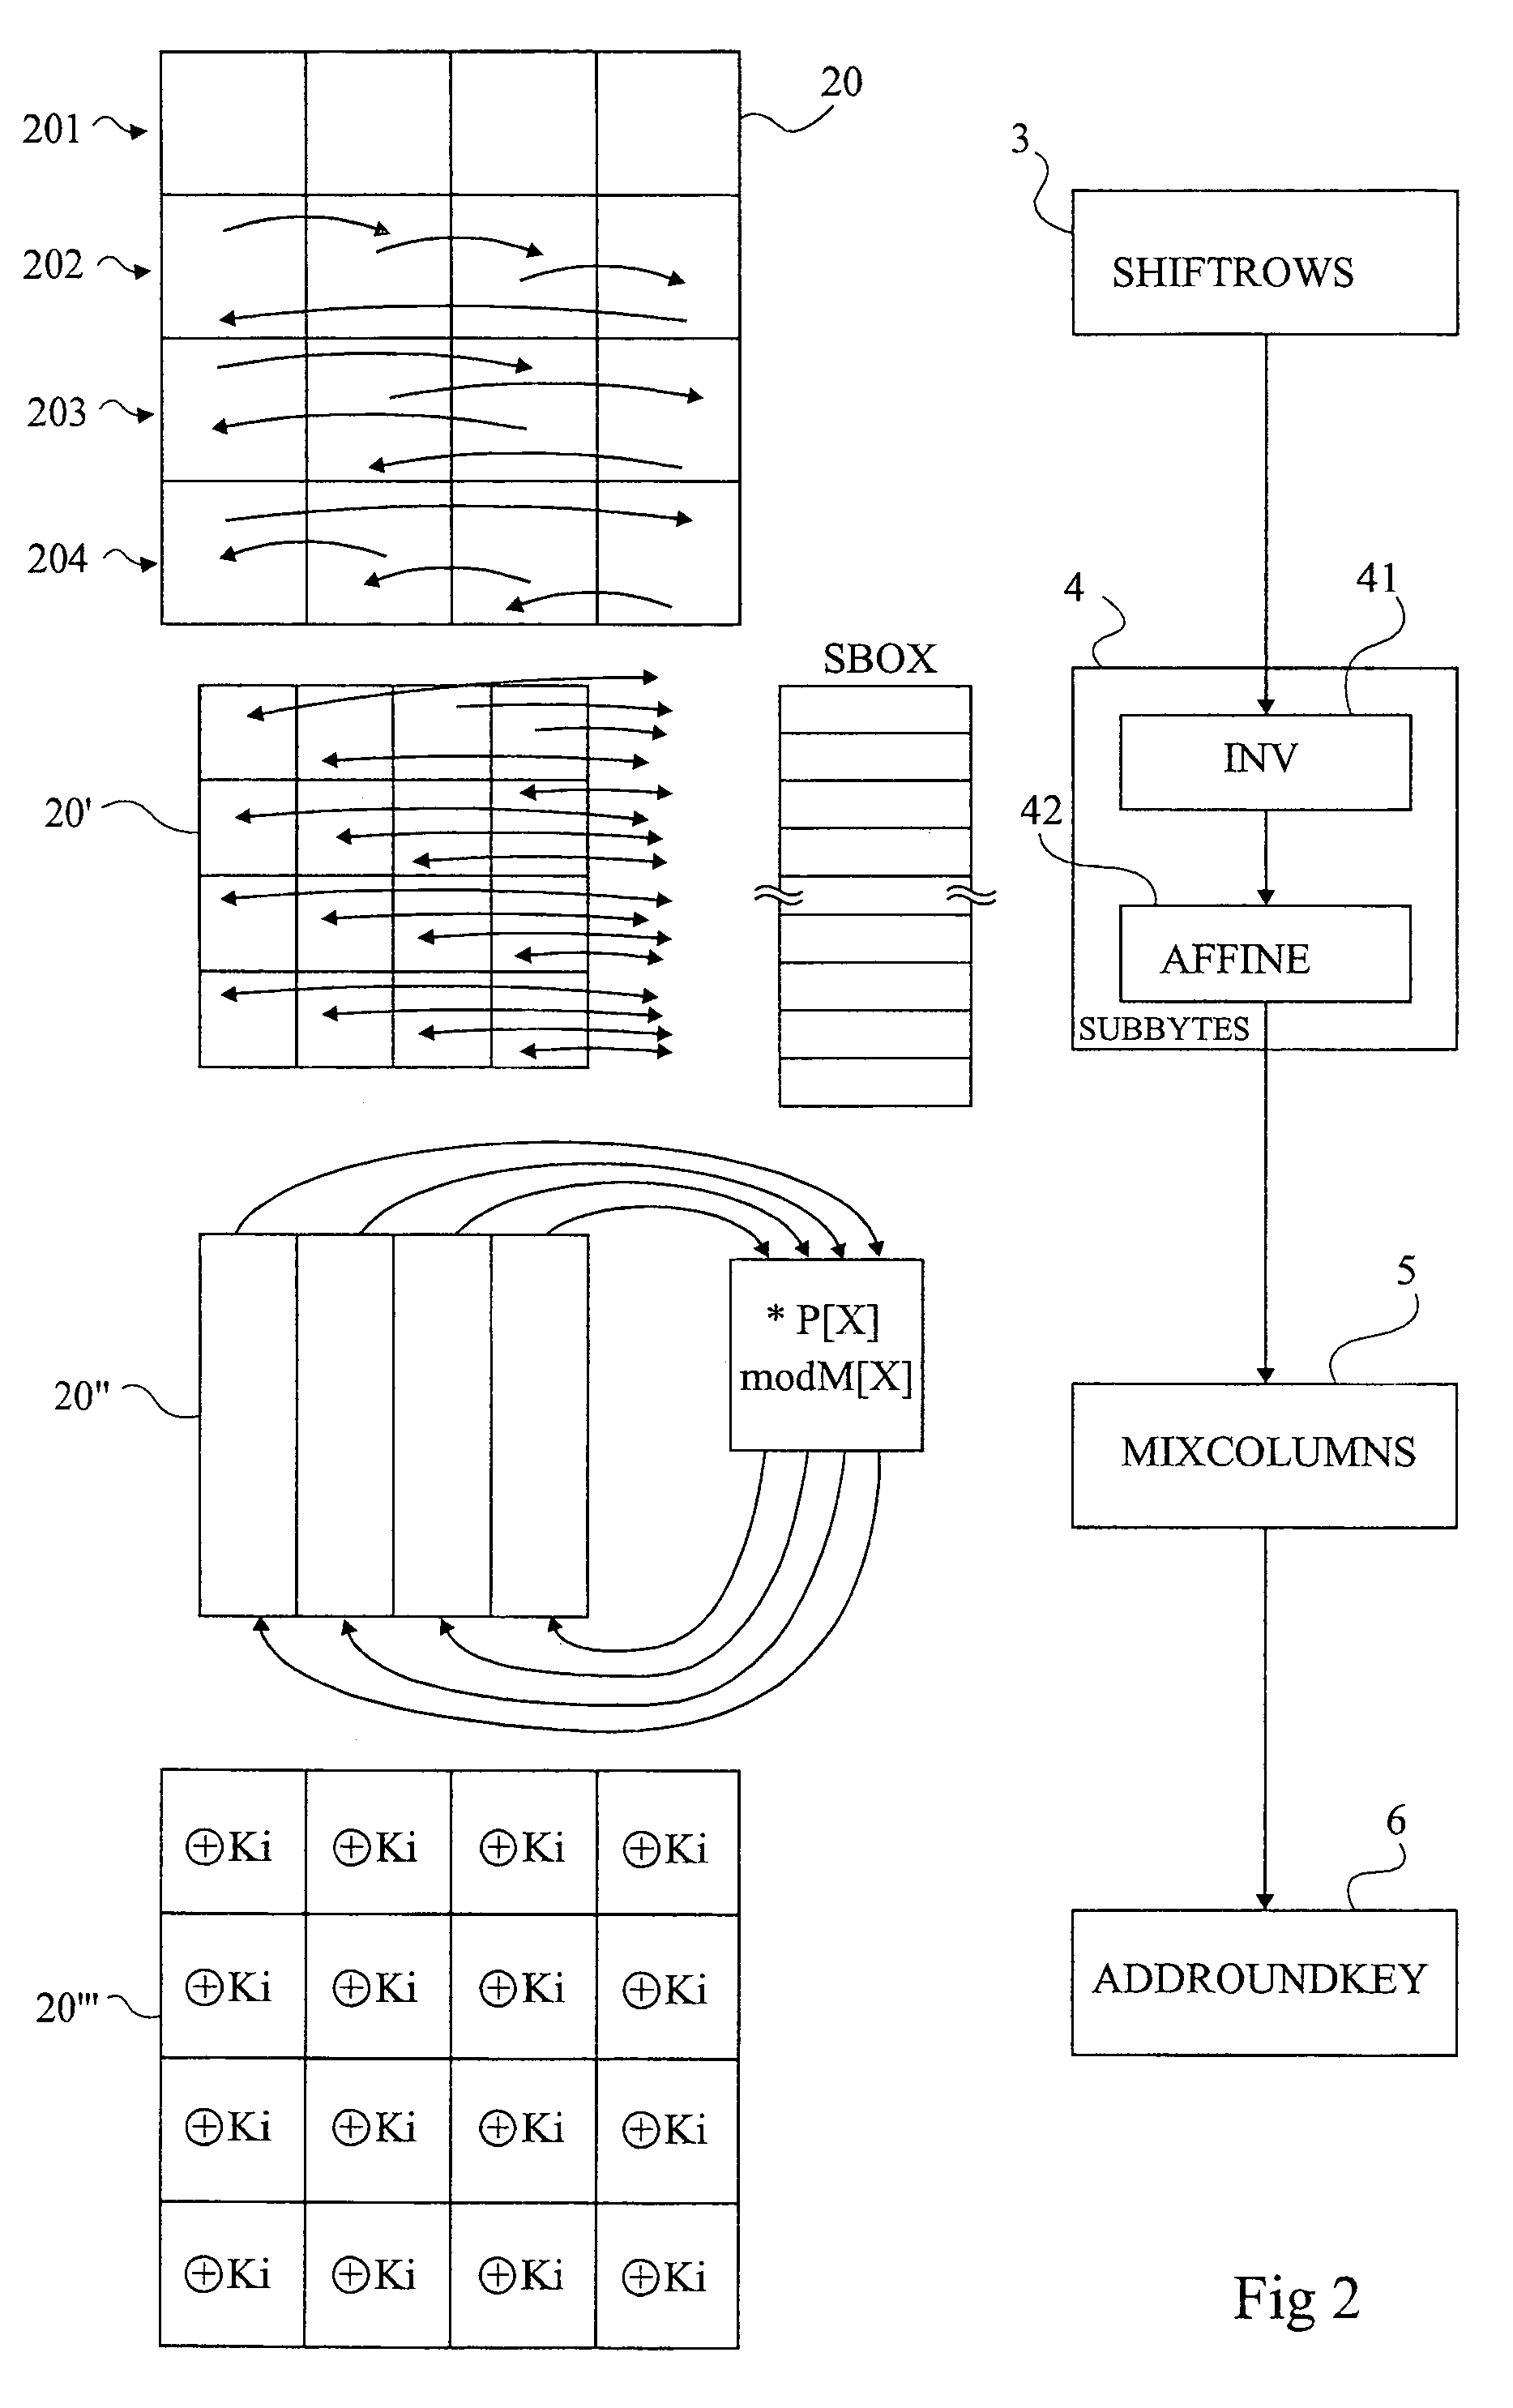 Cyphering/decyphering performed by an integrated circuit